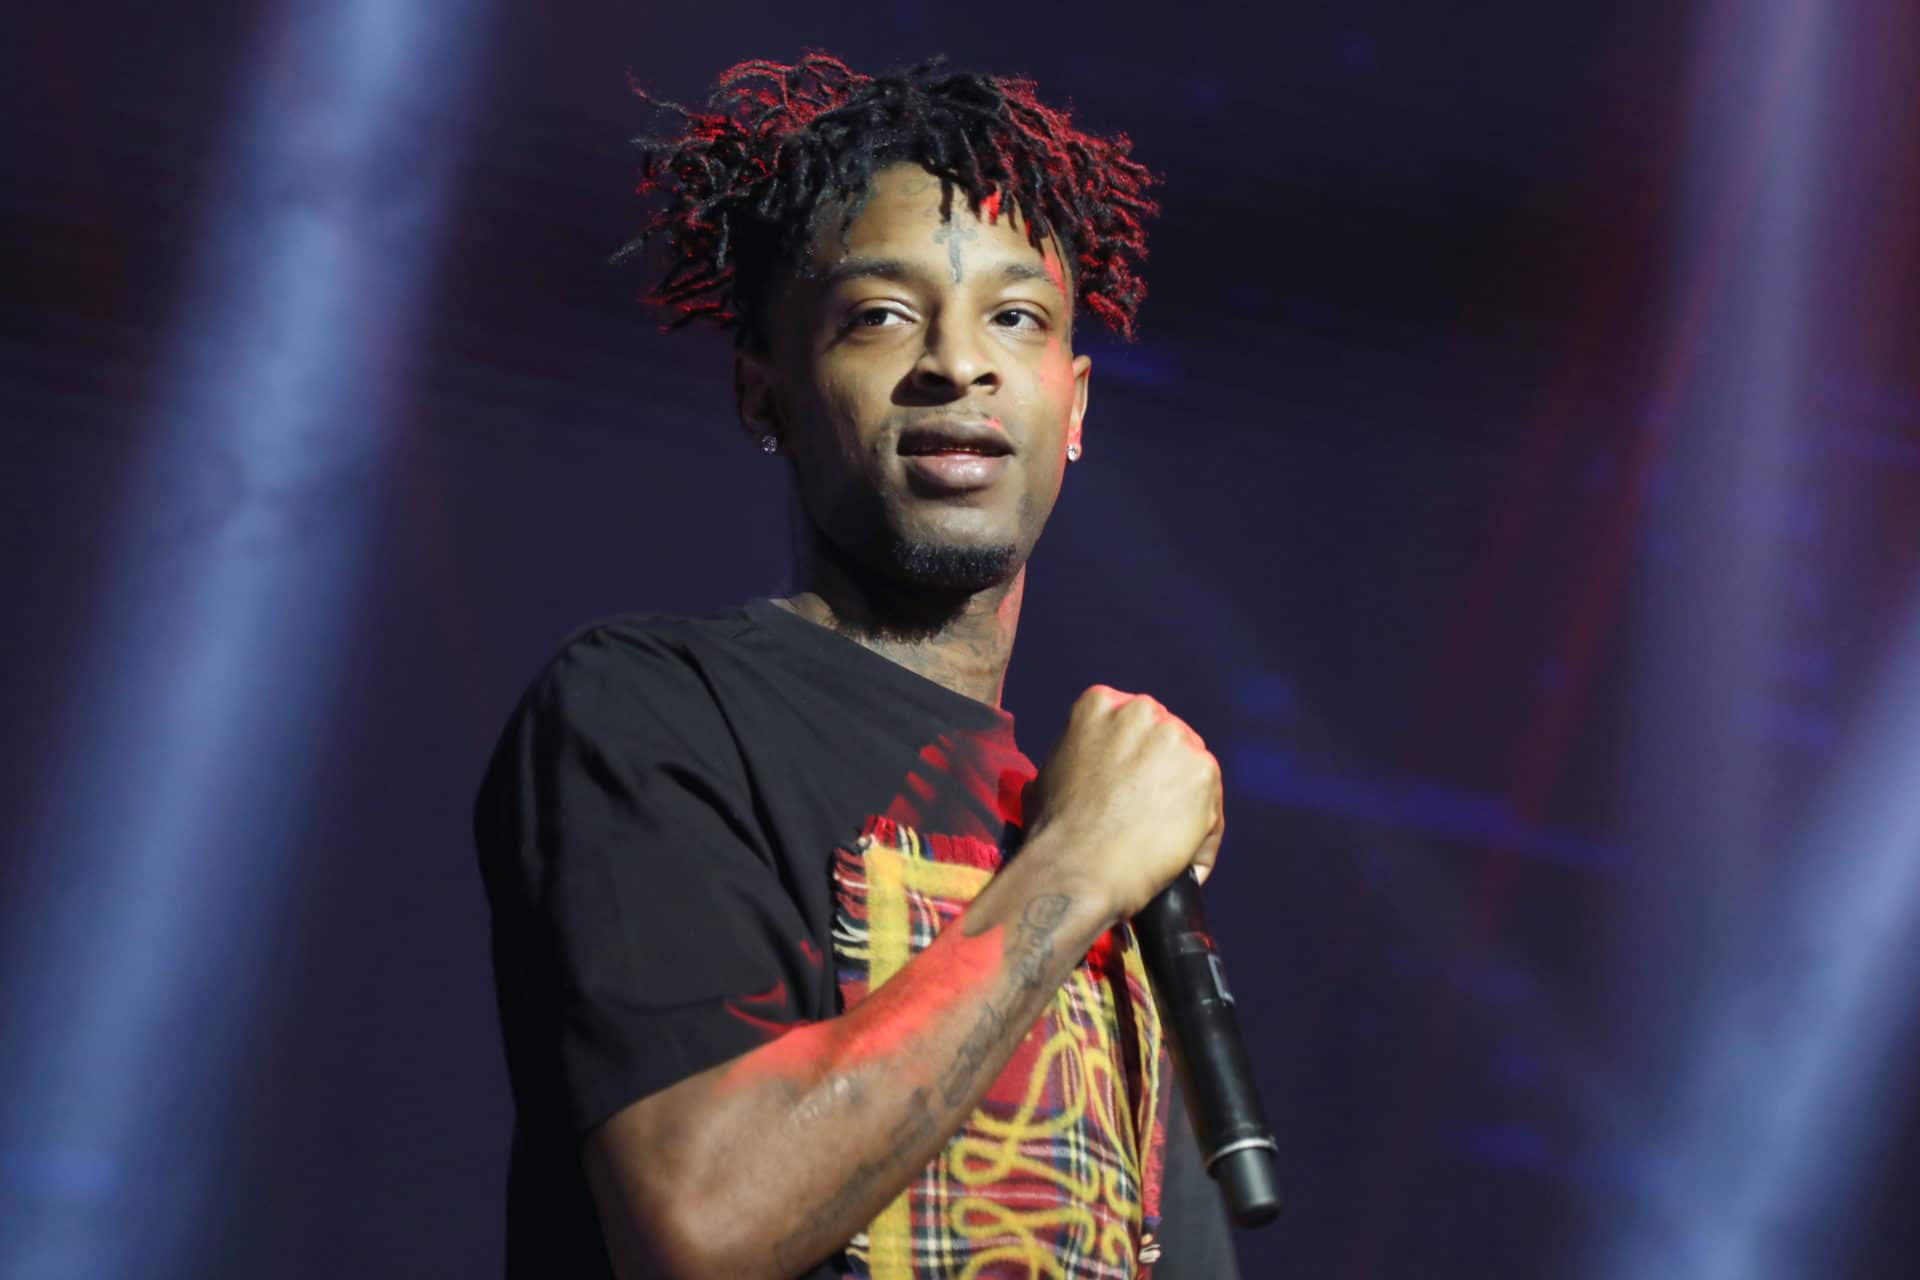 New Details On 21 Savage's Arrest Emerge – Reports Claim Savage's Situation  Is Far Worse Than Expected